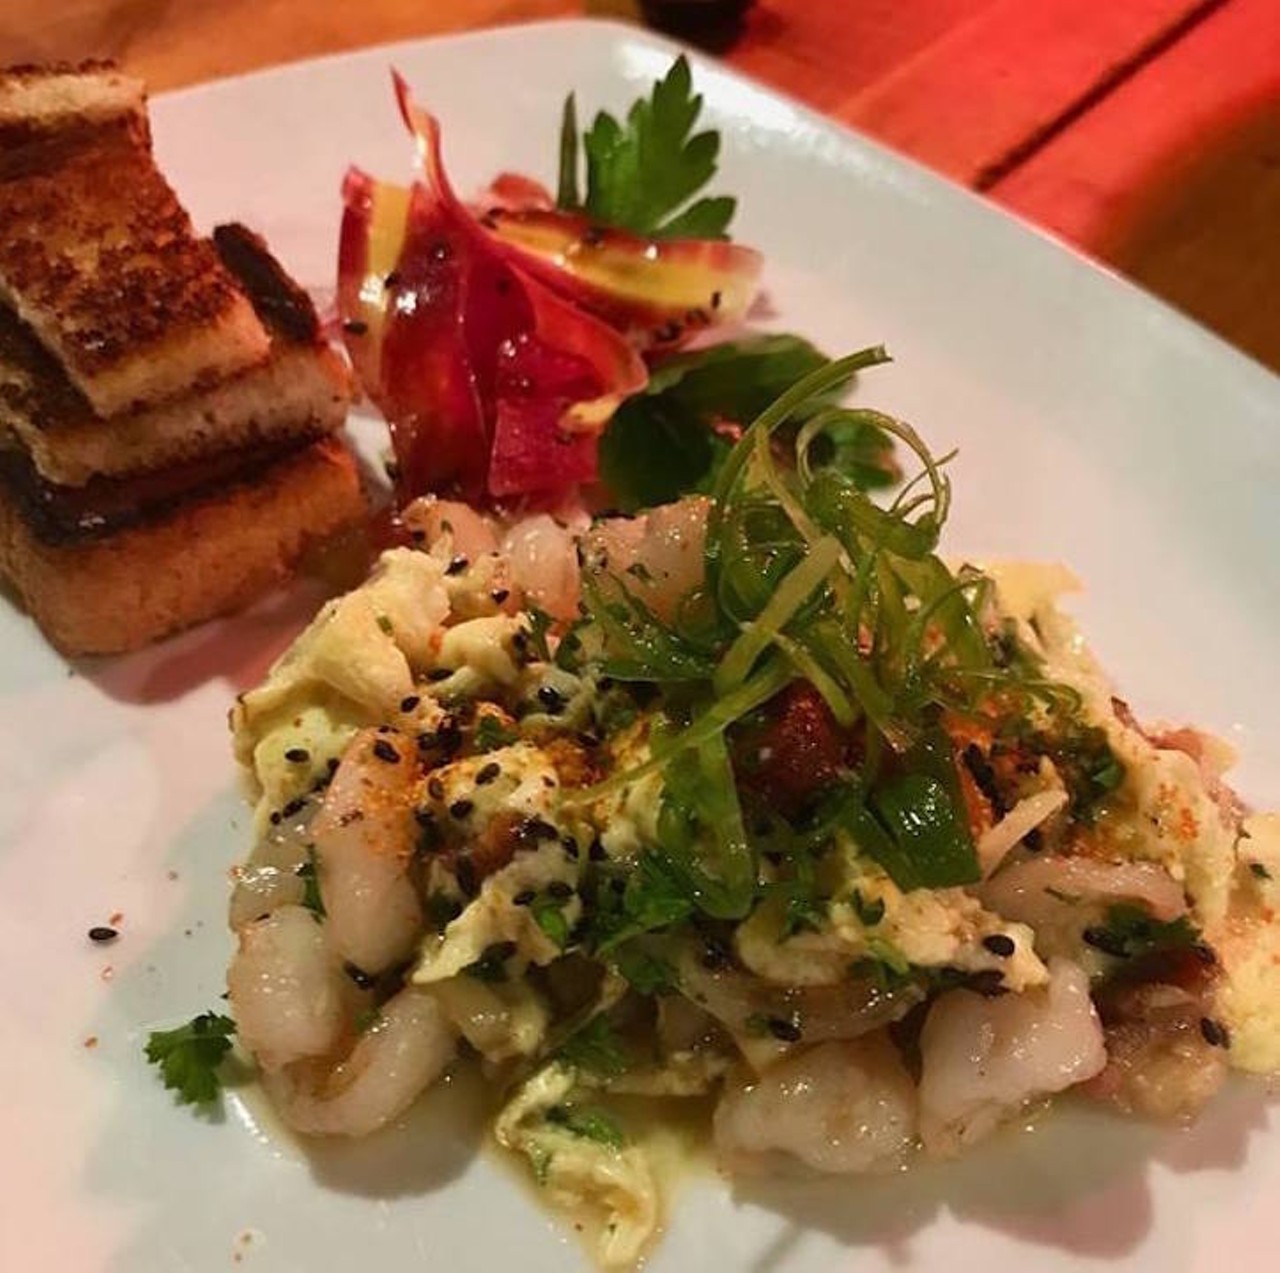 Try the Shrimp Revoltillo with Slab Bacon during their brunch hour. Perfect for a quick bite. 
Photo via El Buda via Facebook